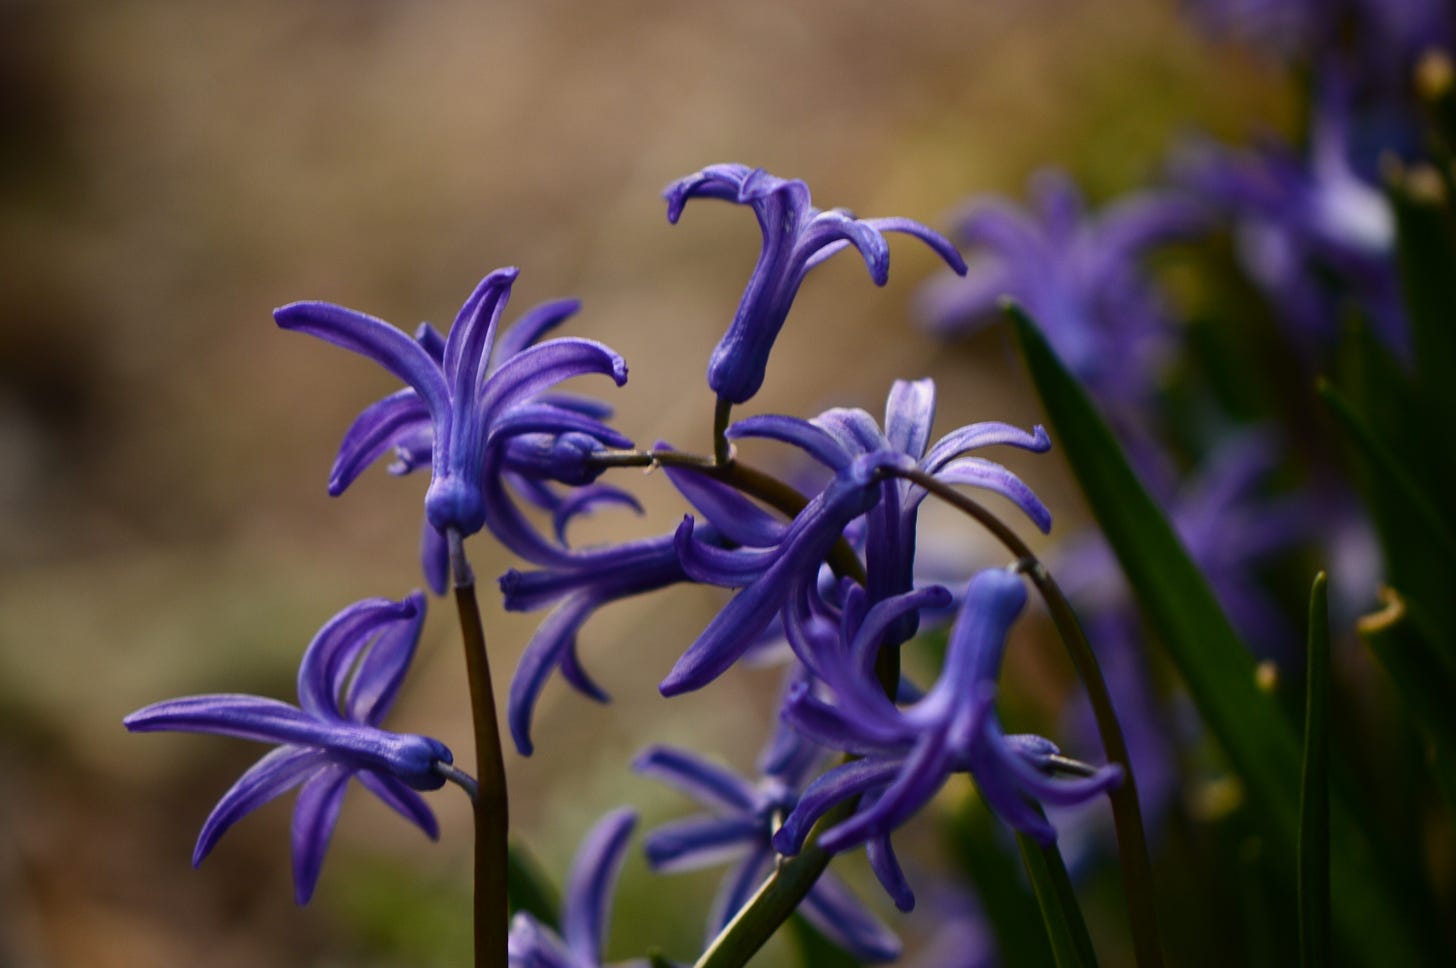 a cluster of blue Roman hyacinth blooms, mostly facing away, against a warm background